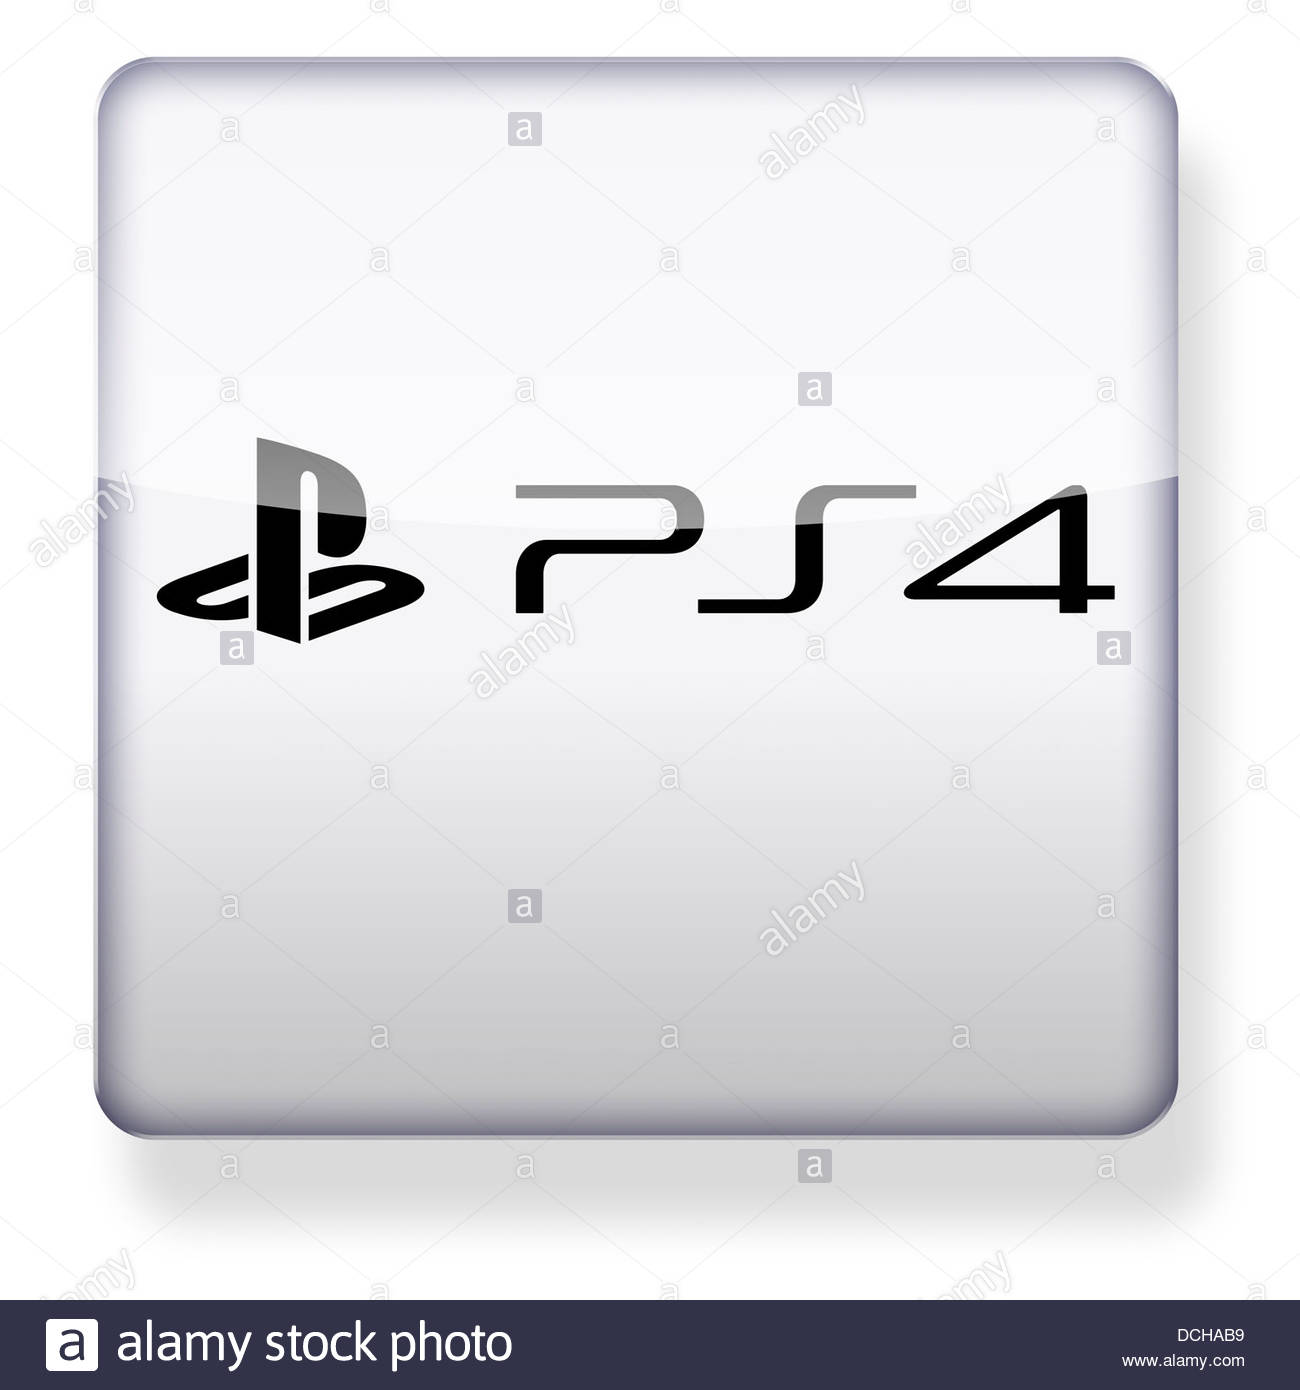 Ps4 game console - Free entertainment icons